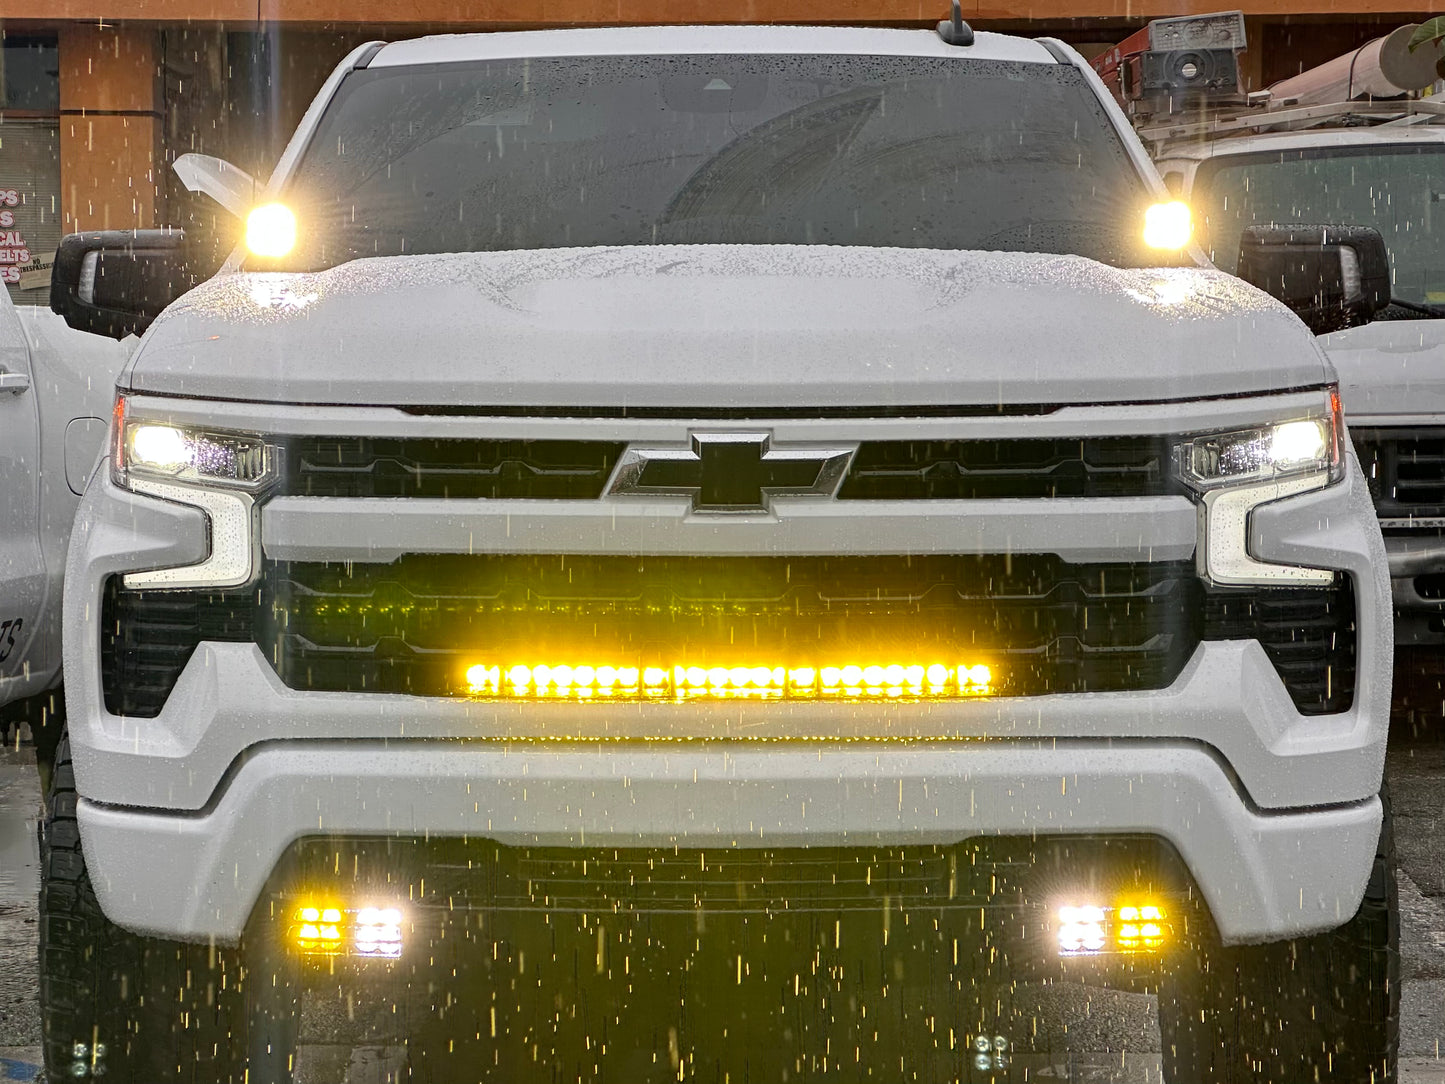 22-23 Chevy Silverado 1500 Behind the Grille Light Bar Mount Kit for Baja Designs 30 inch Light Bar